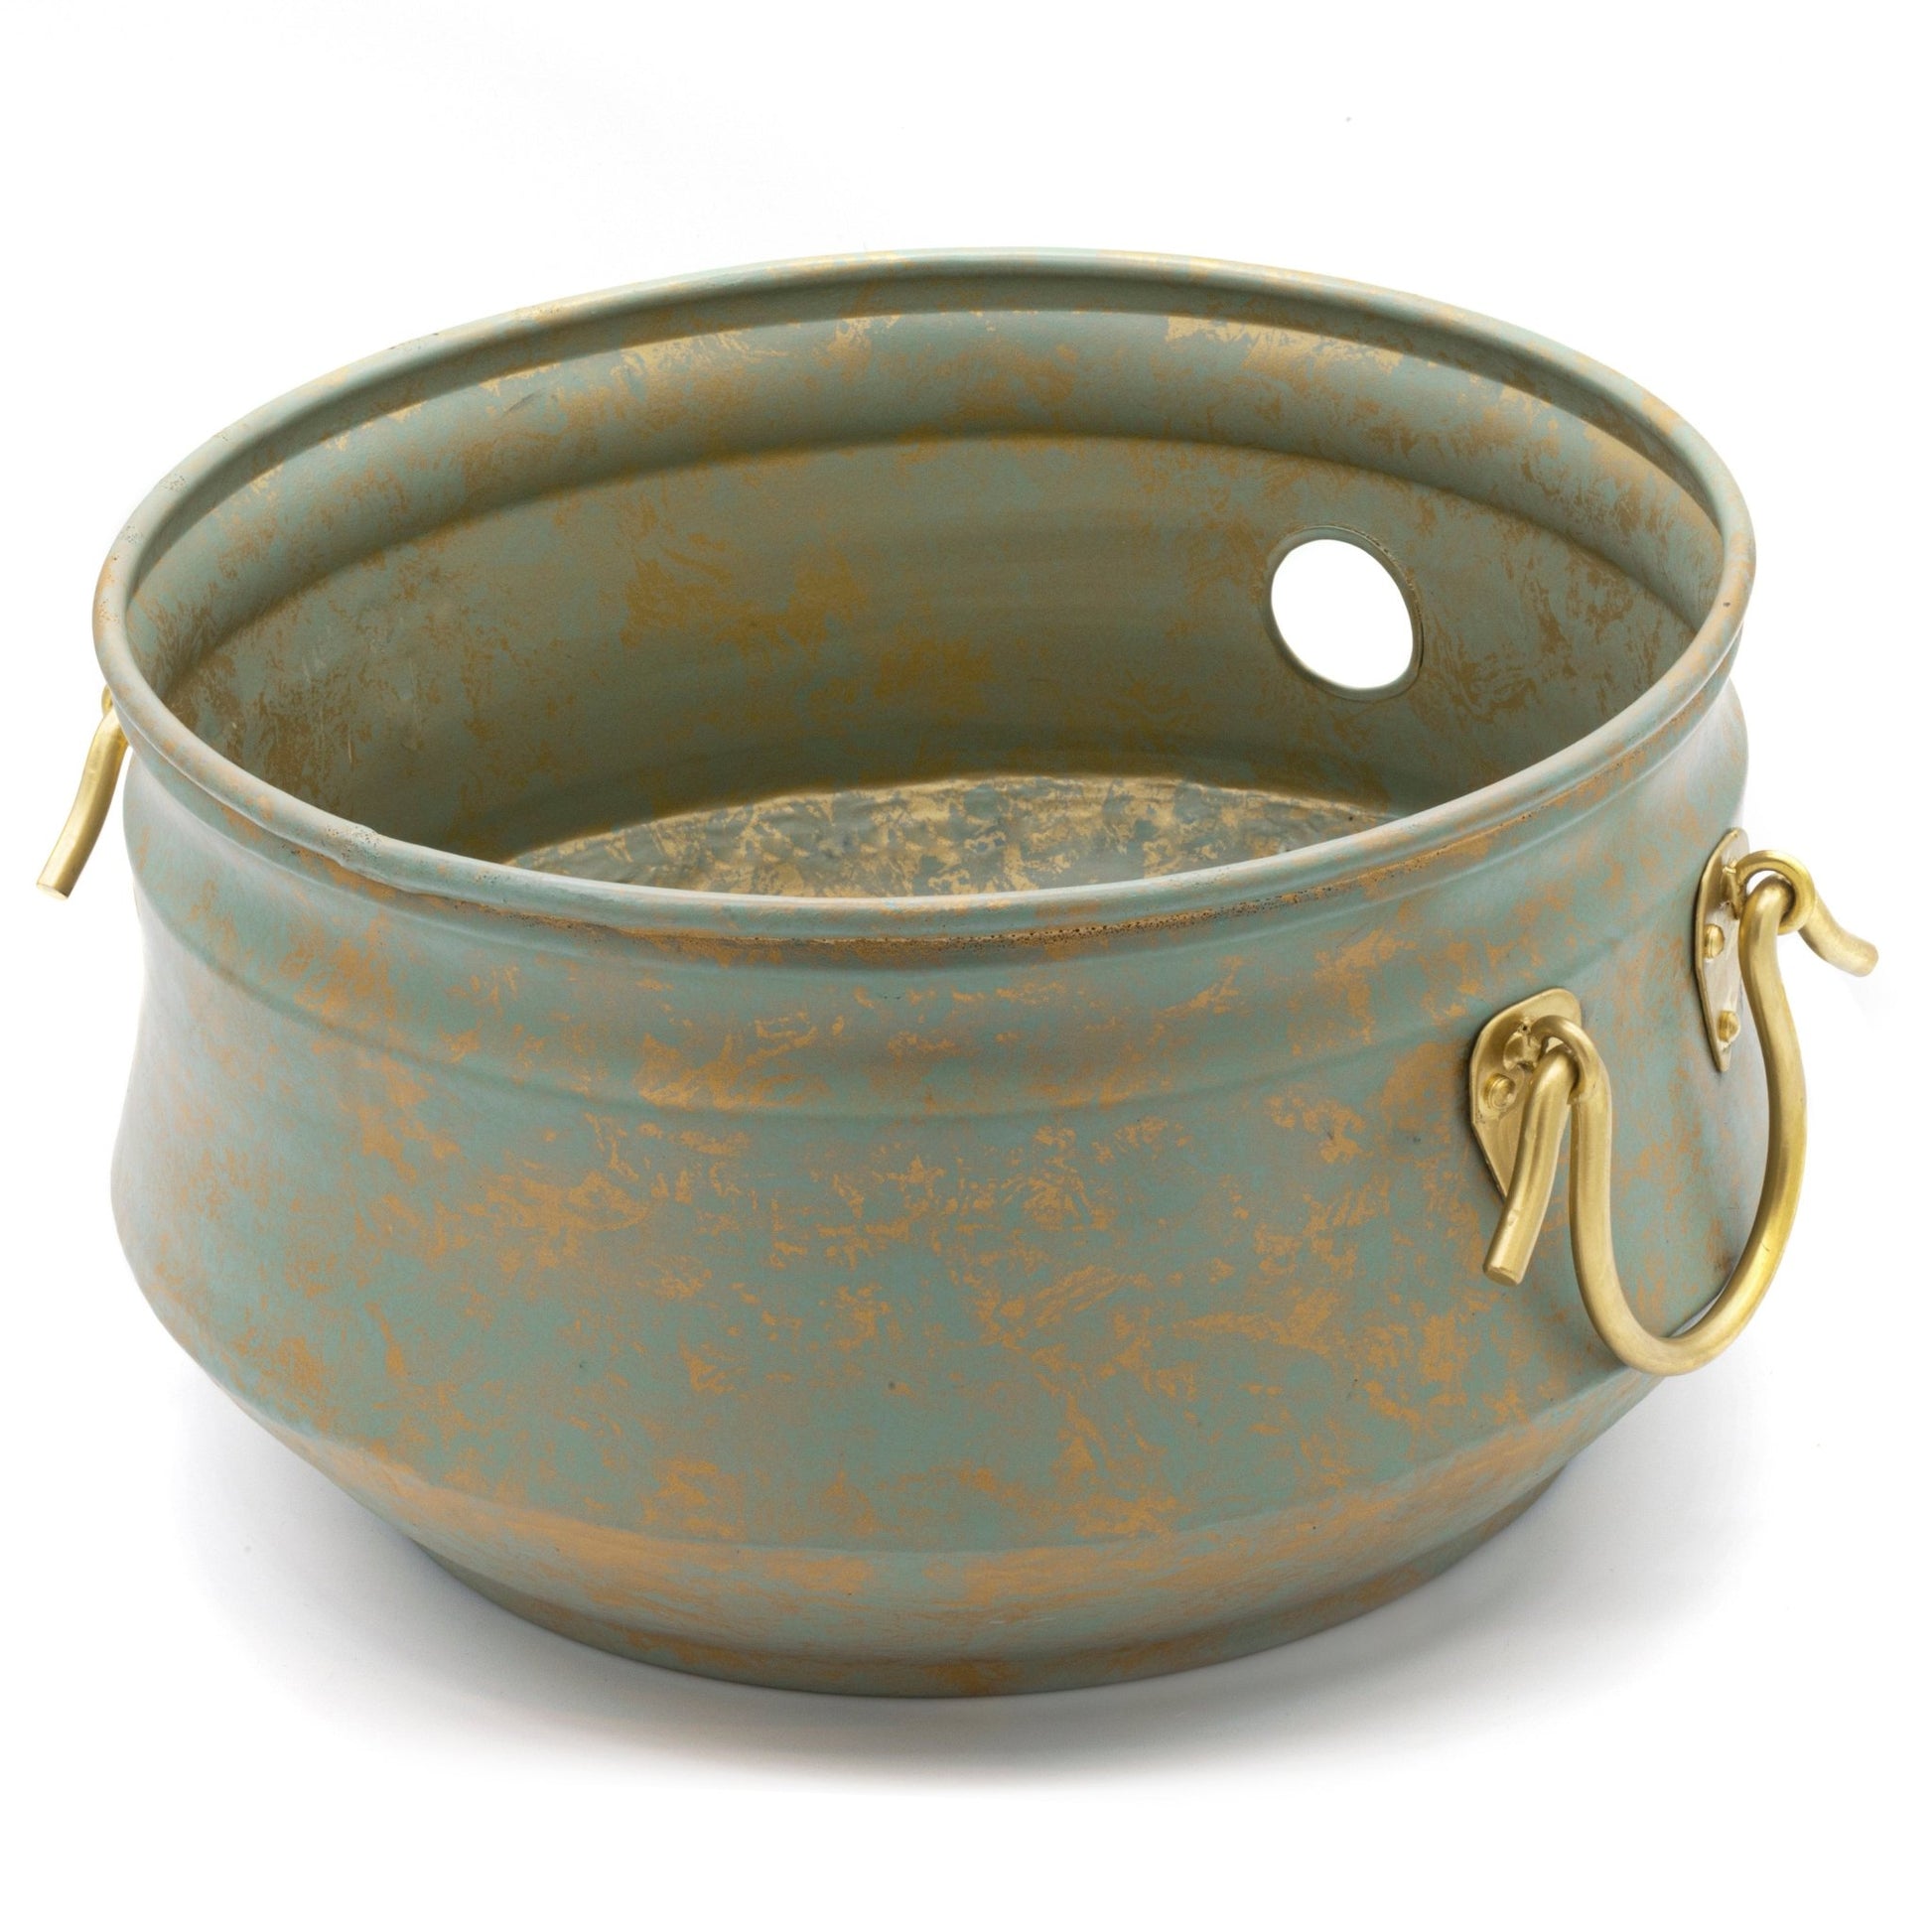 Sedona Hose Pot with Lid, Brass Accents - Good Directions